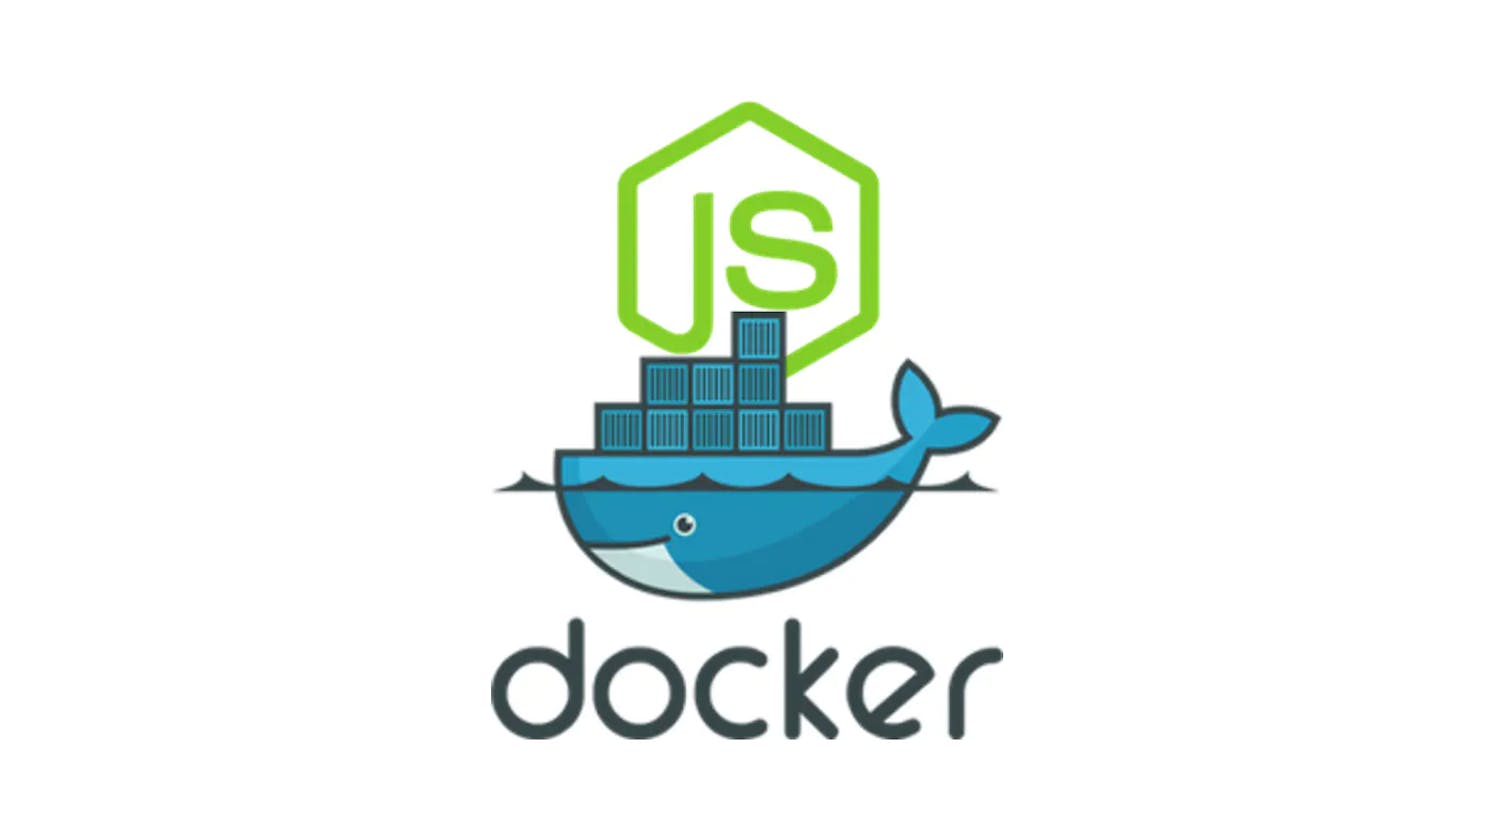 Creating three simple micro-services using NodeJS and deploying them using Docker + Kubernetes